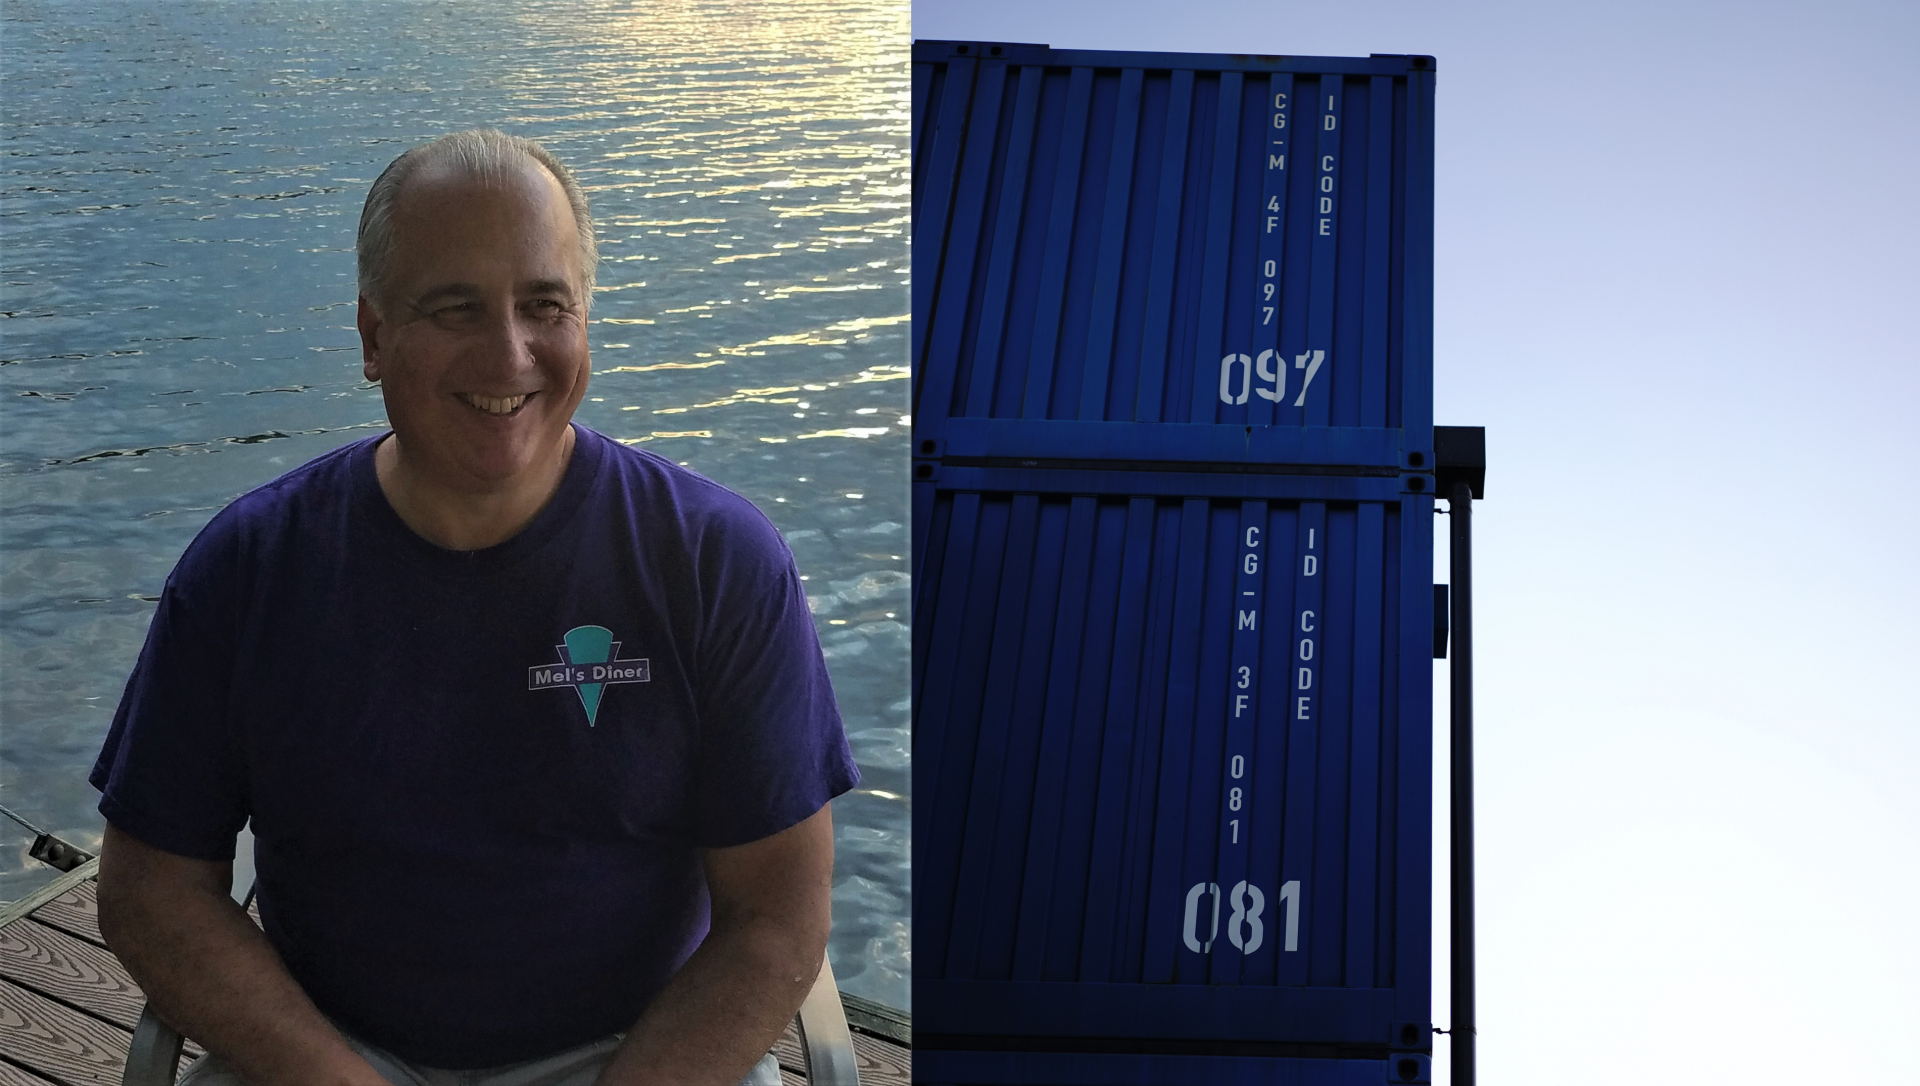 Kevin Polak, engineer behind the NuCONTAINER